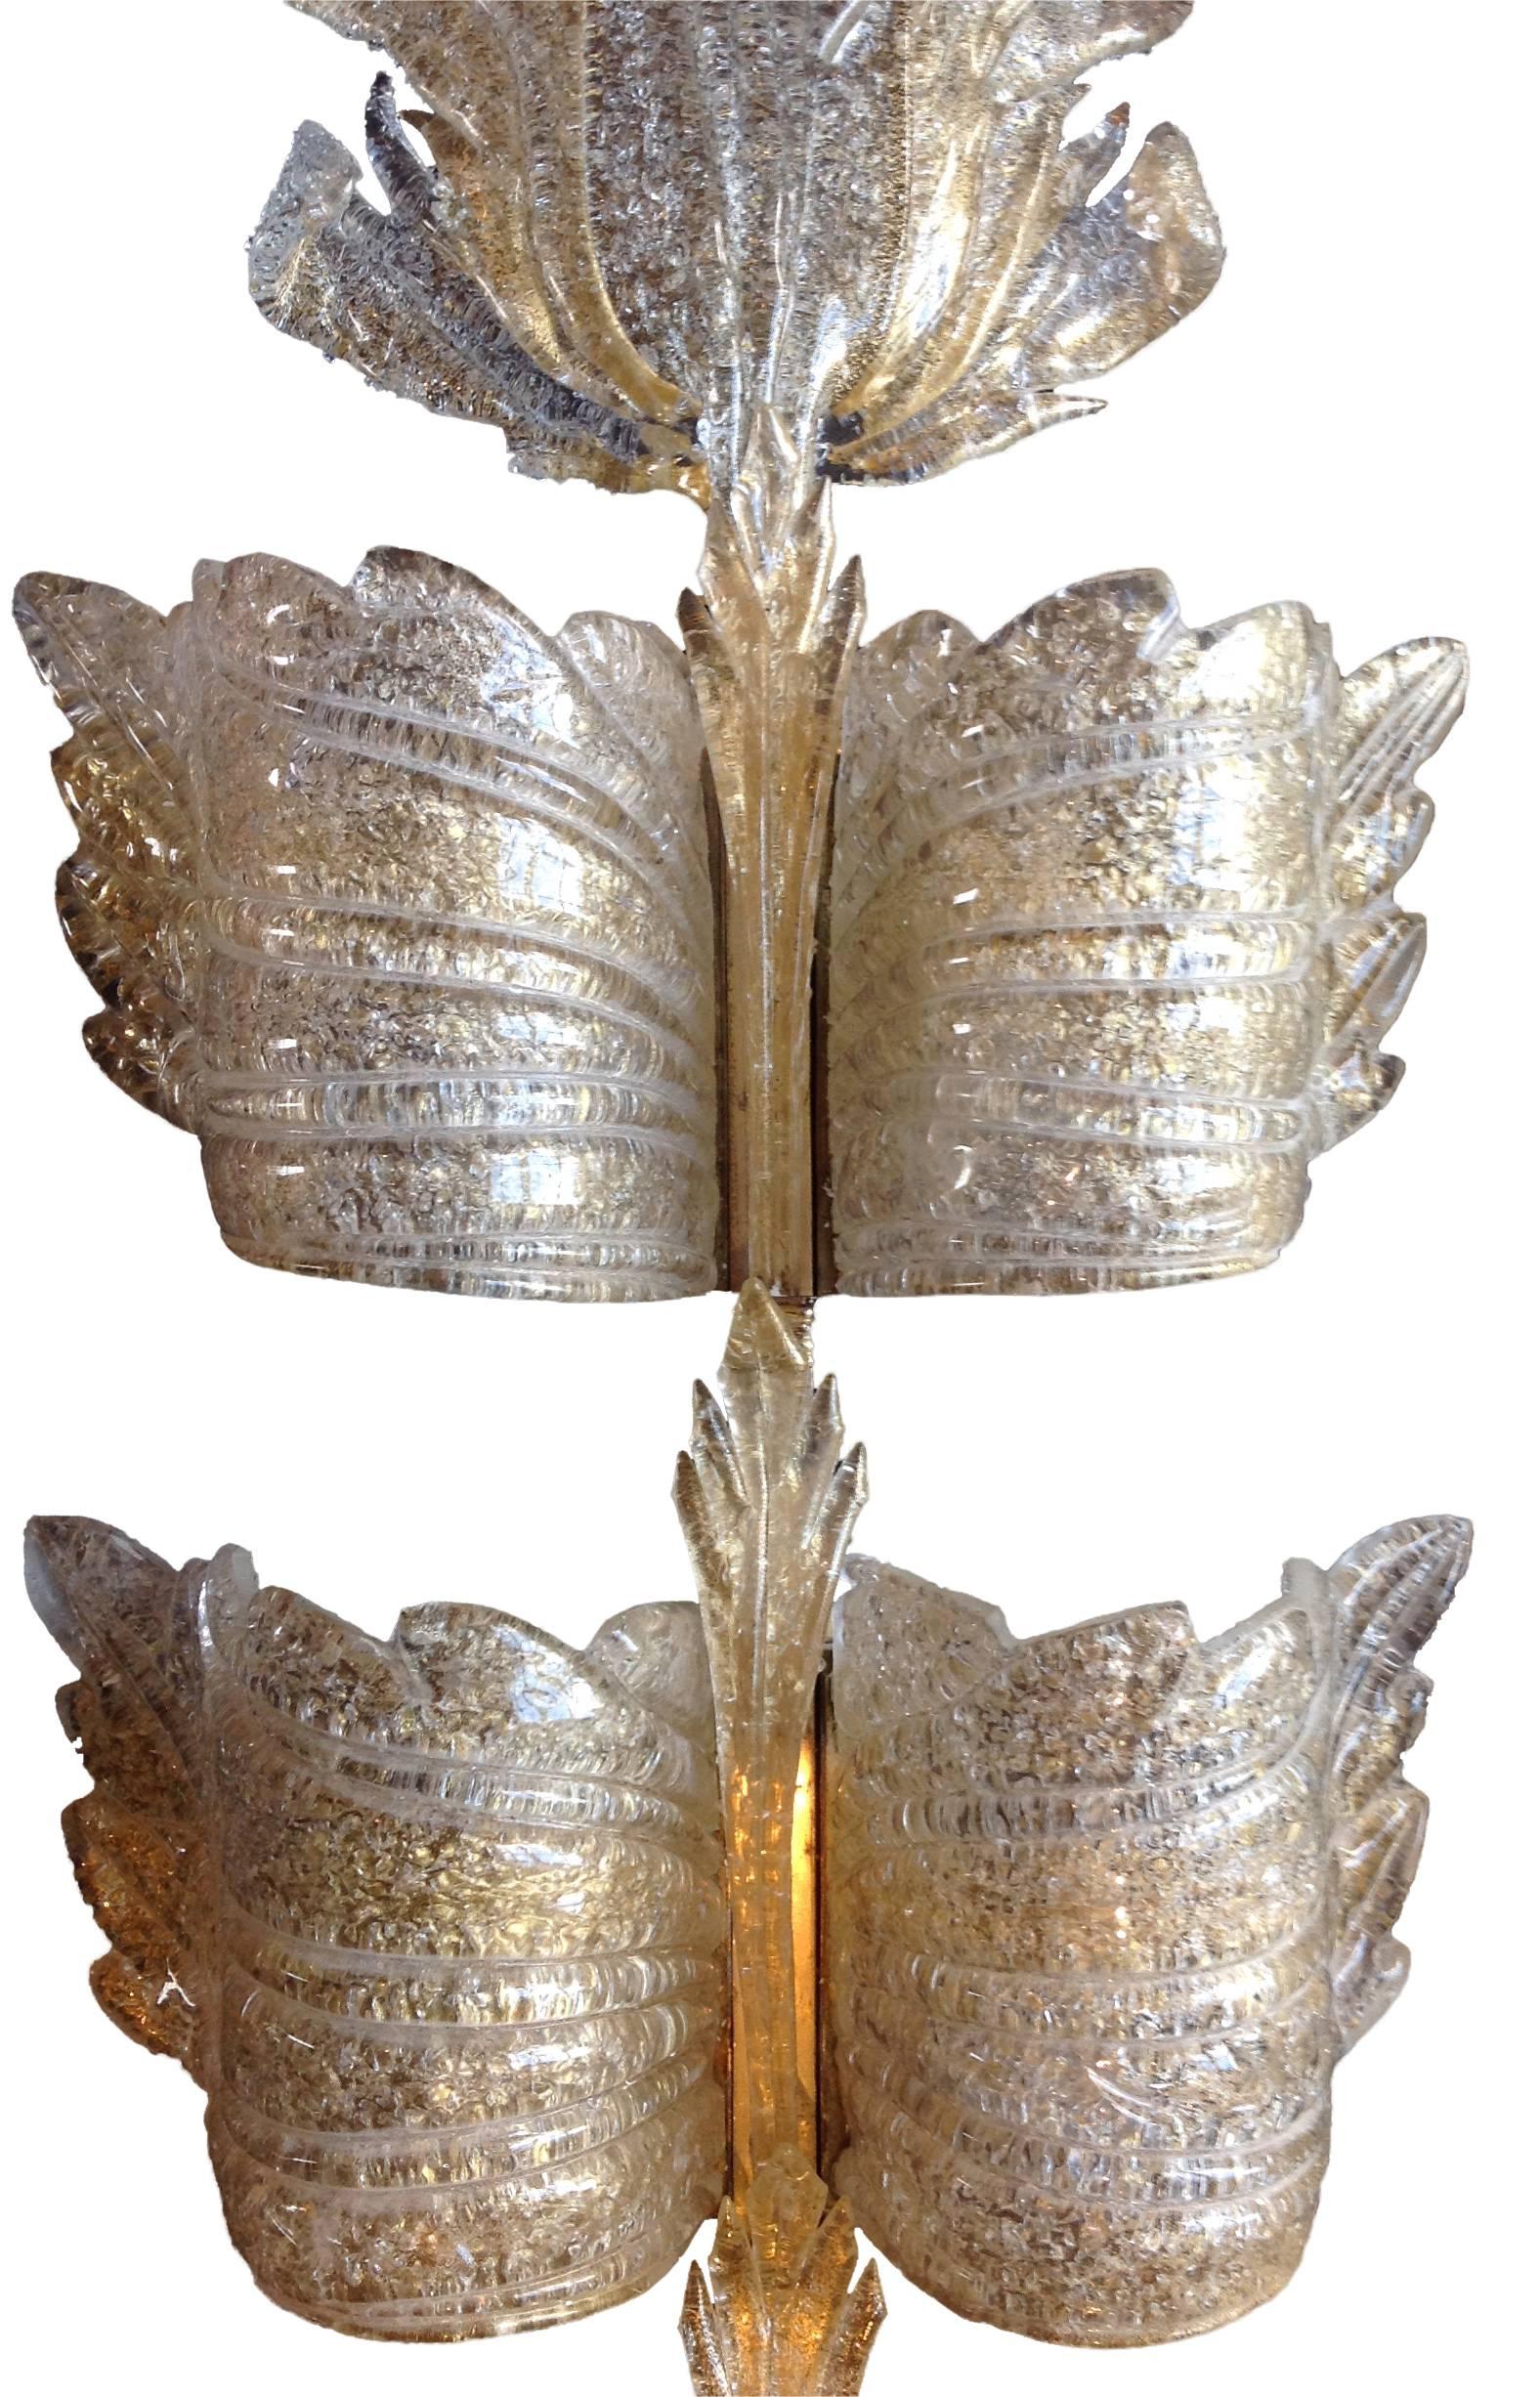 A large gold leaf "Champagne" Murano glass wall sconces by Seguso, Murano, Italy. The sconce has six curved glass leaves that surround six bulbs beneath, mounted on a brass wall bracket. Three slim central glass leaves run up the middle